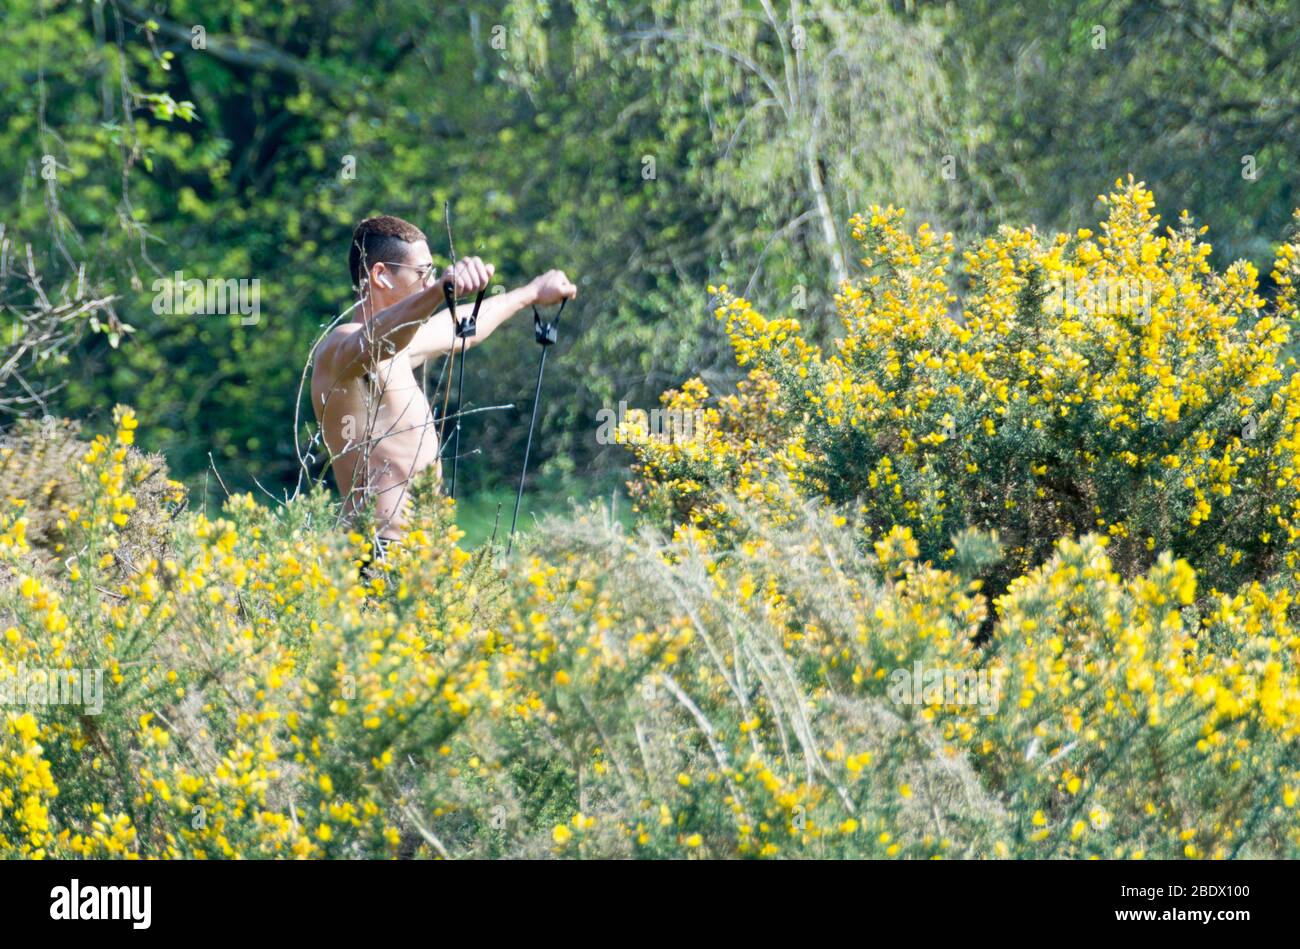 Self-isolation workout - a young man exercising in a field of yellow Gorse (Ulex) and Cytisus scoparius (Scotch broom) Stock Photo